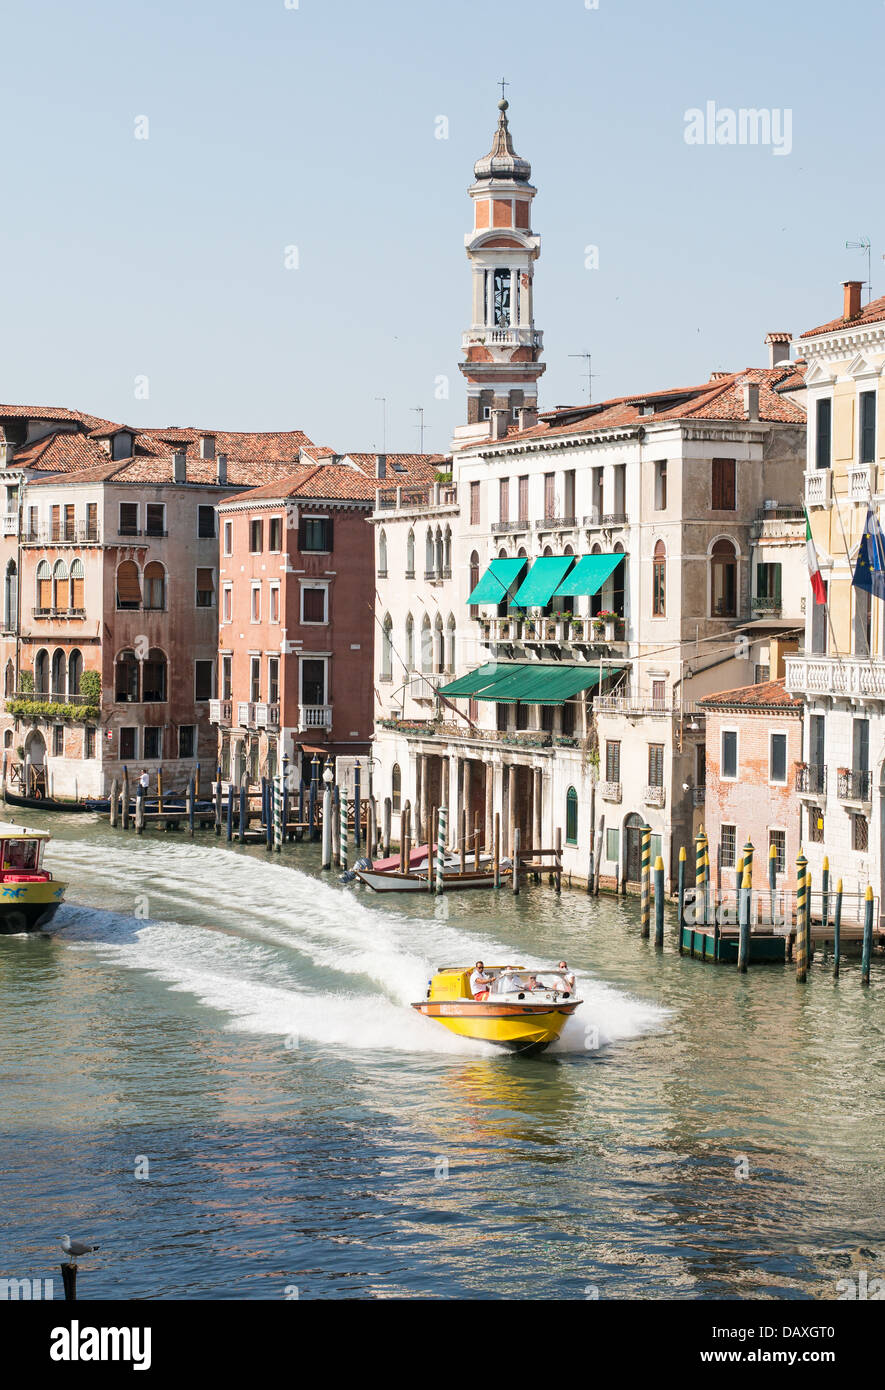 A water  ambulance speeds along the Grand Canal Venice, as seen from the Rialto Bridge Stock Photo